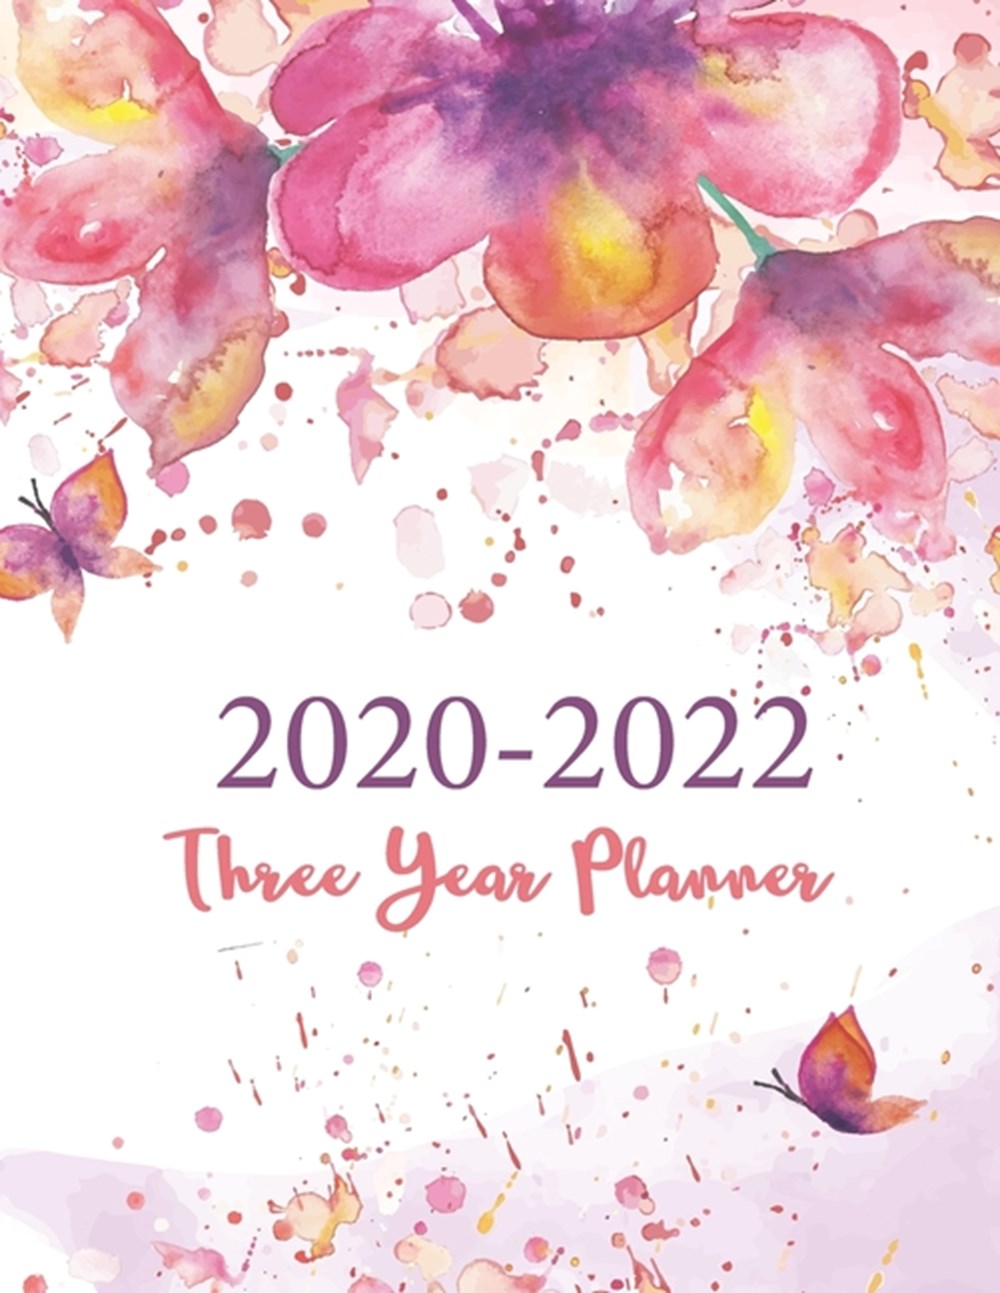 2020-2022 Three Year Planner White Marble Cover - 3-Year Planner - 36 Months Calendar Agenda and Org